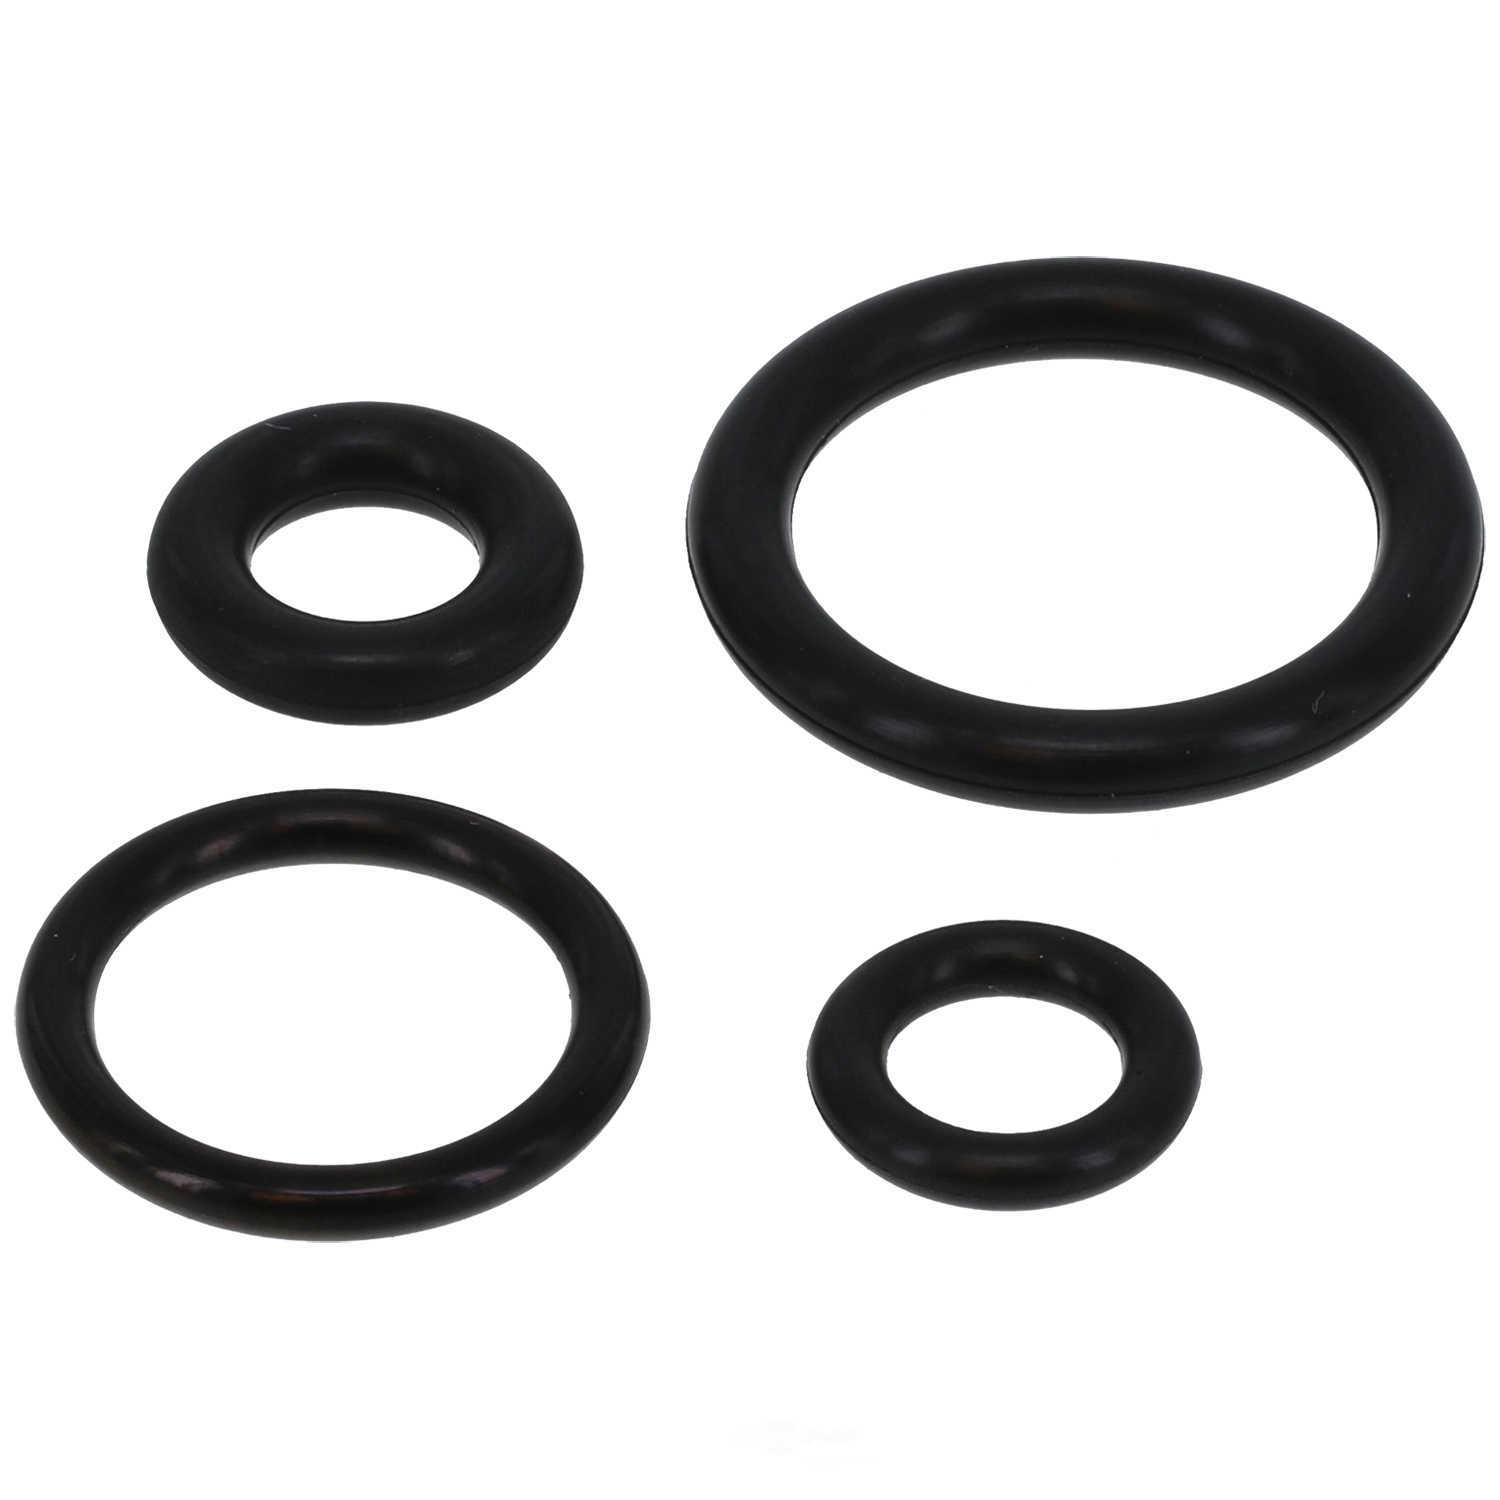 GB REMANUFACTURING INC. - Fuel Injector Seal Kit - GBR 8-001